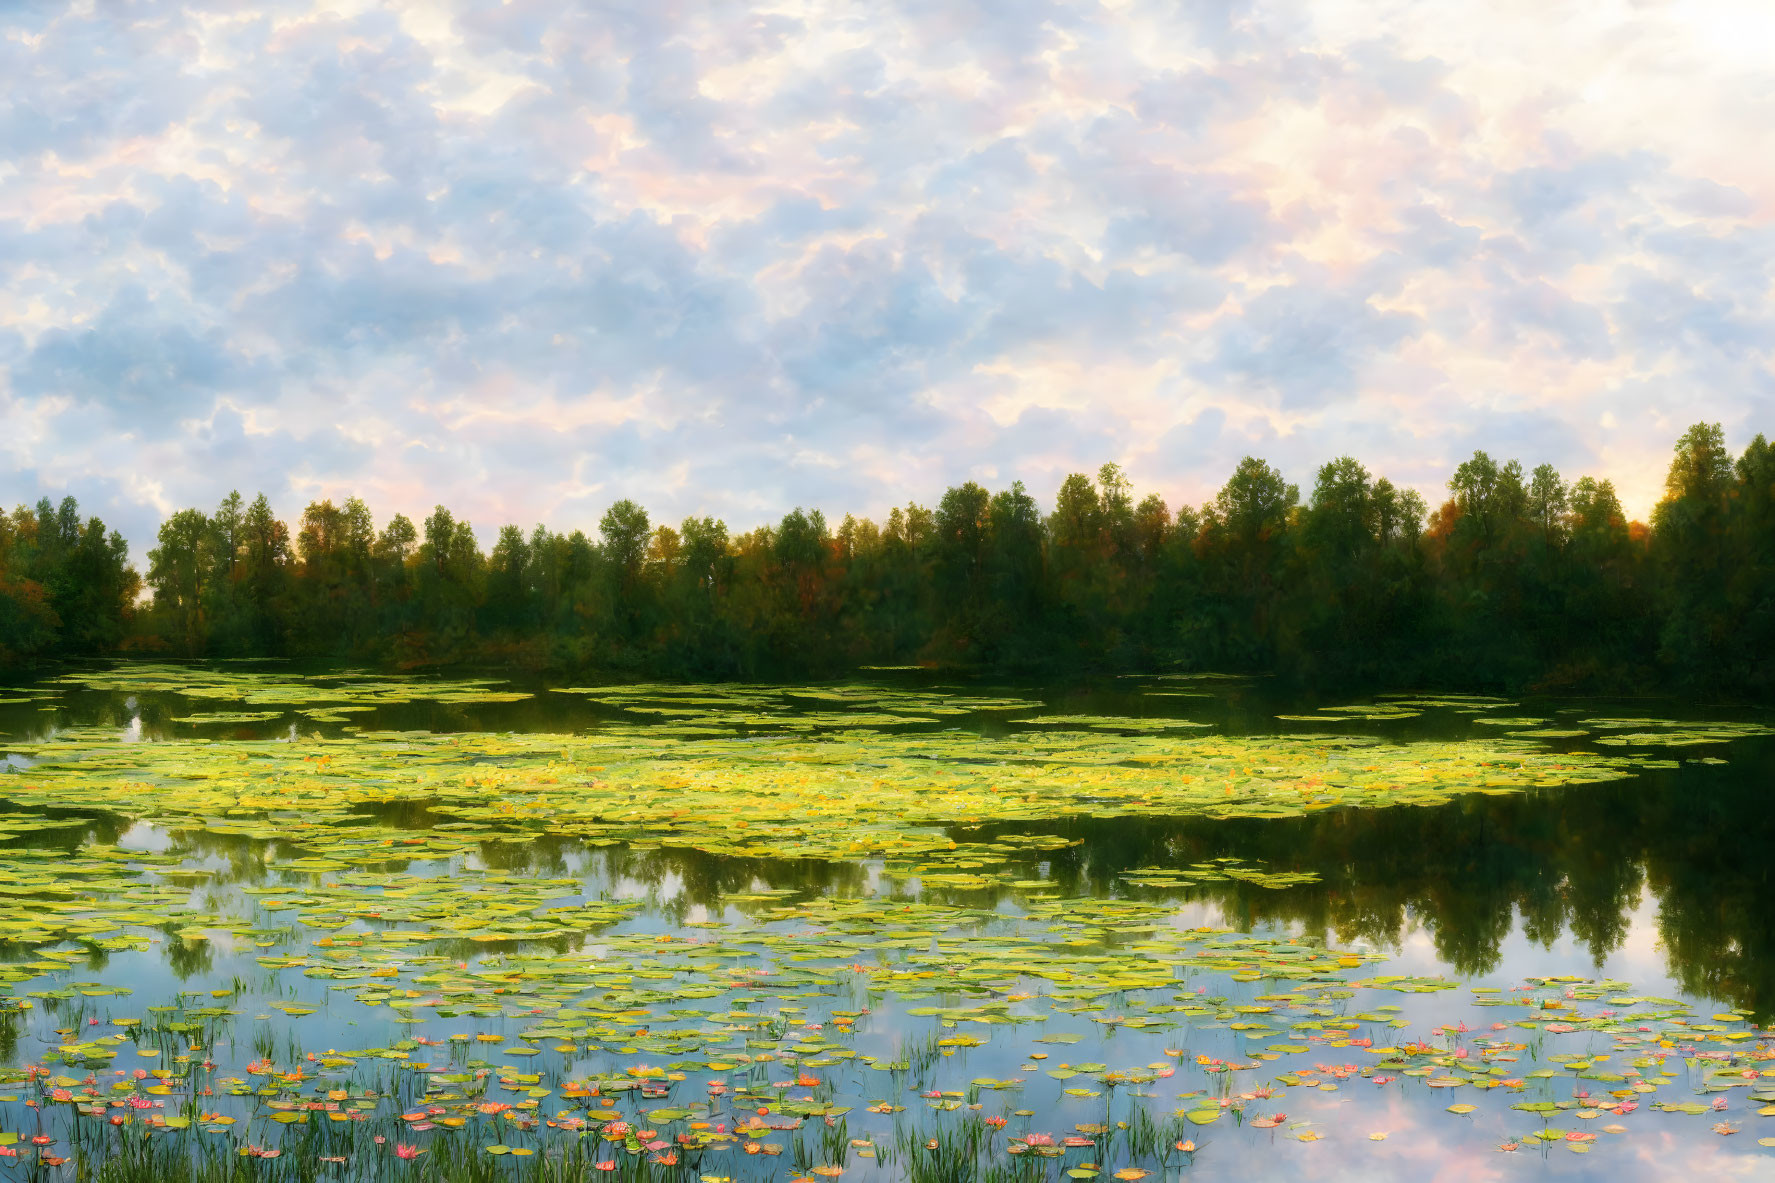 Tranquil lake with water lilies under pastel sky at sunrise/sunset